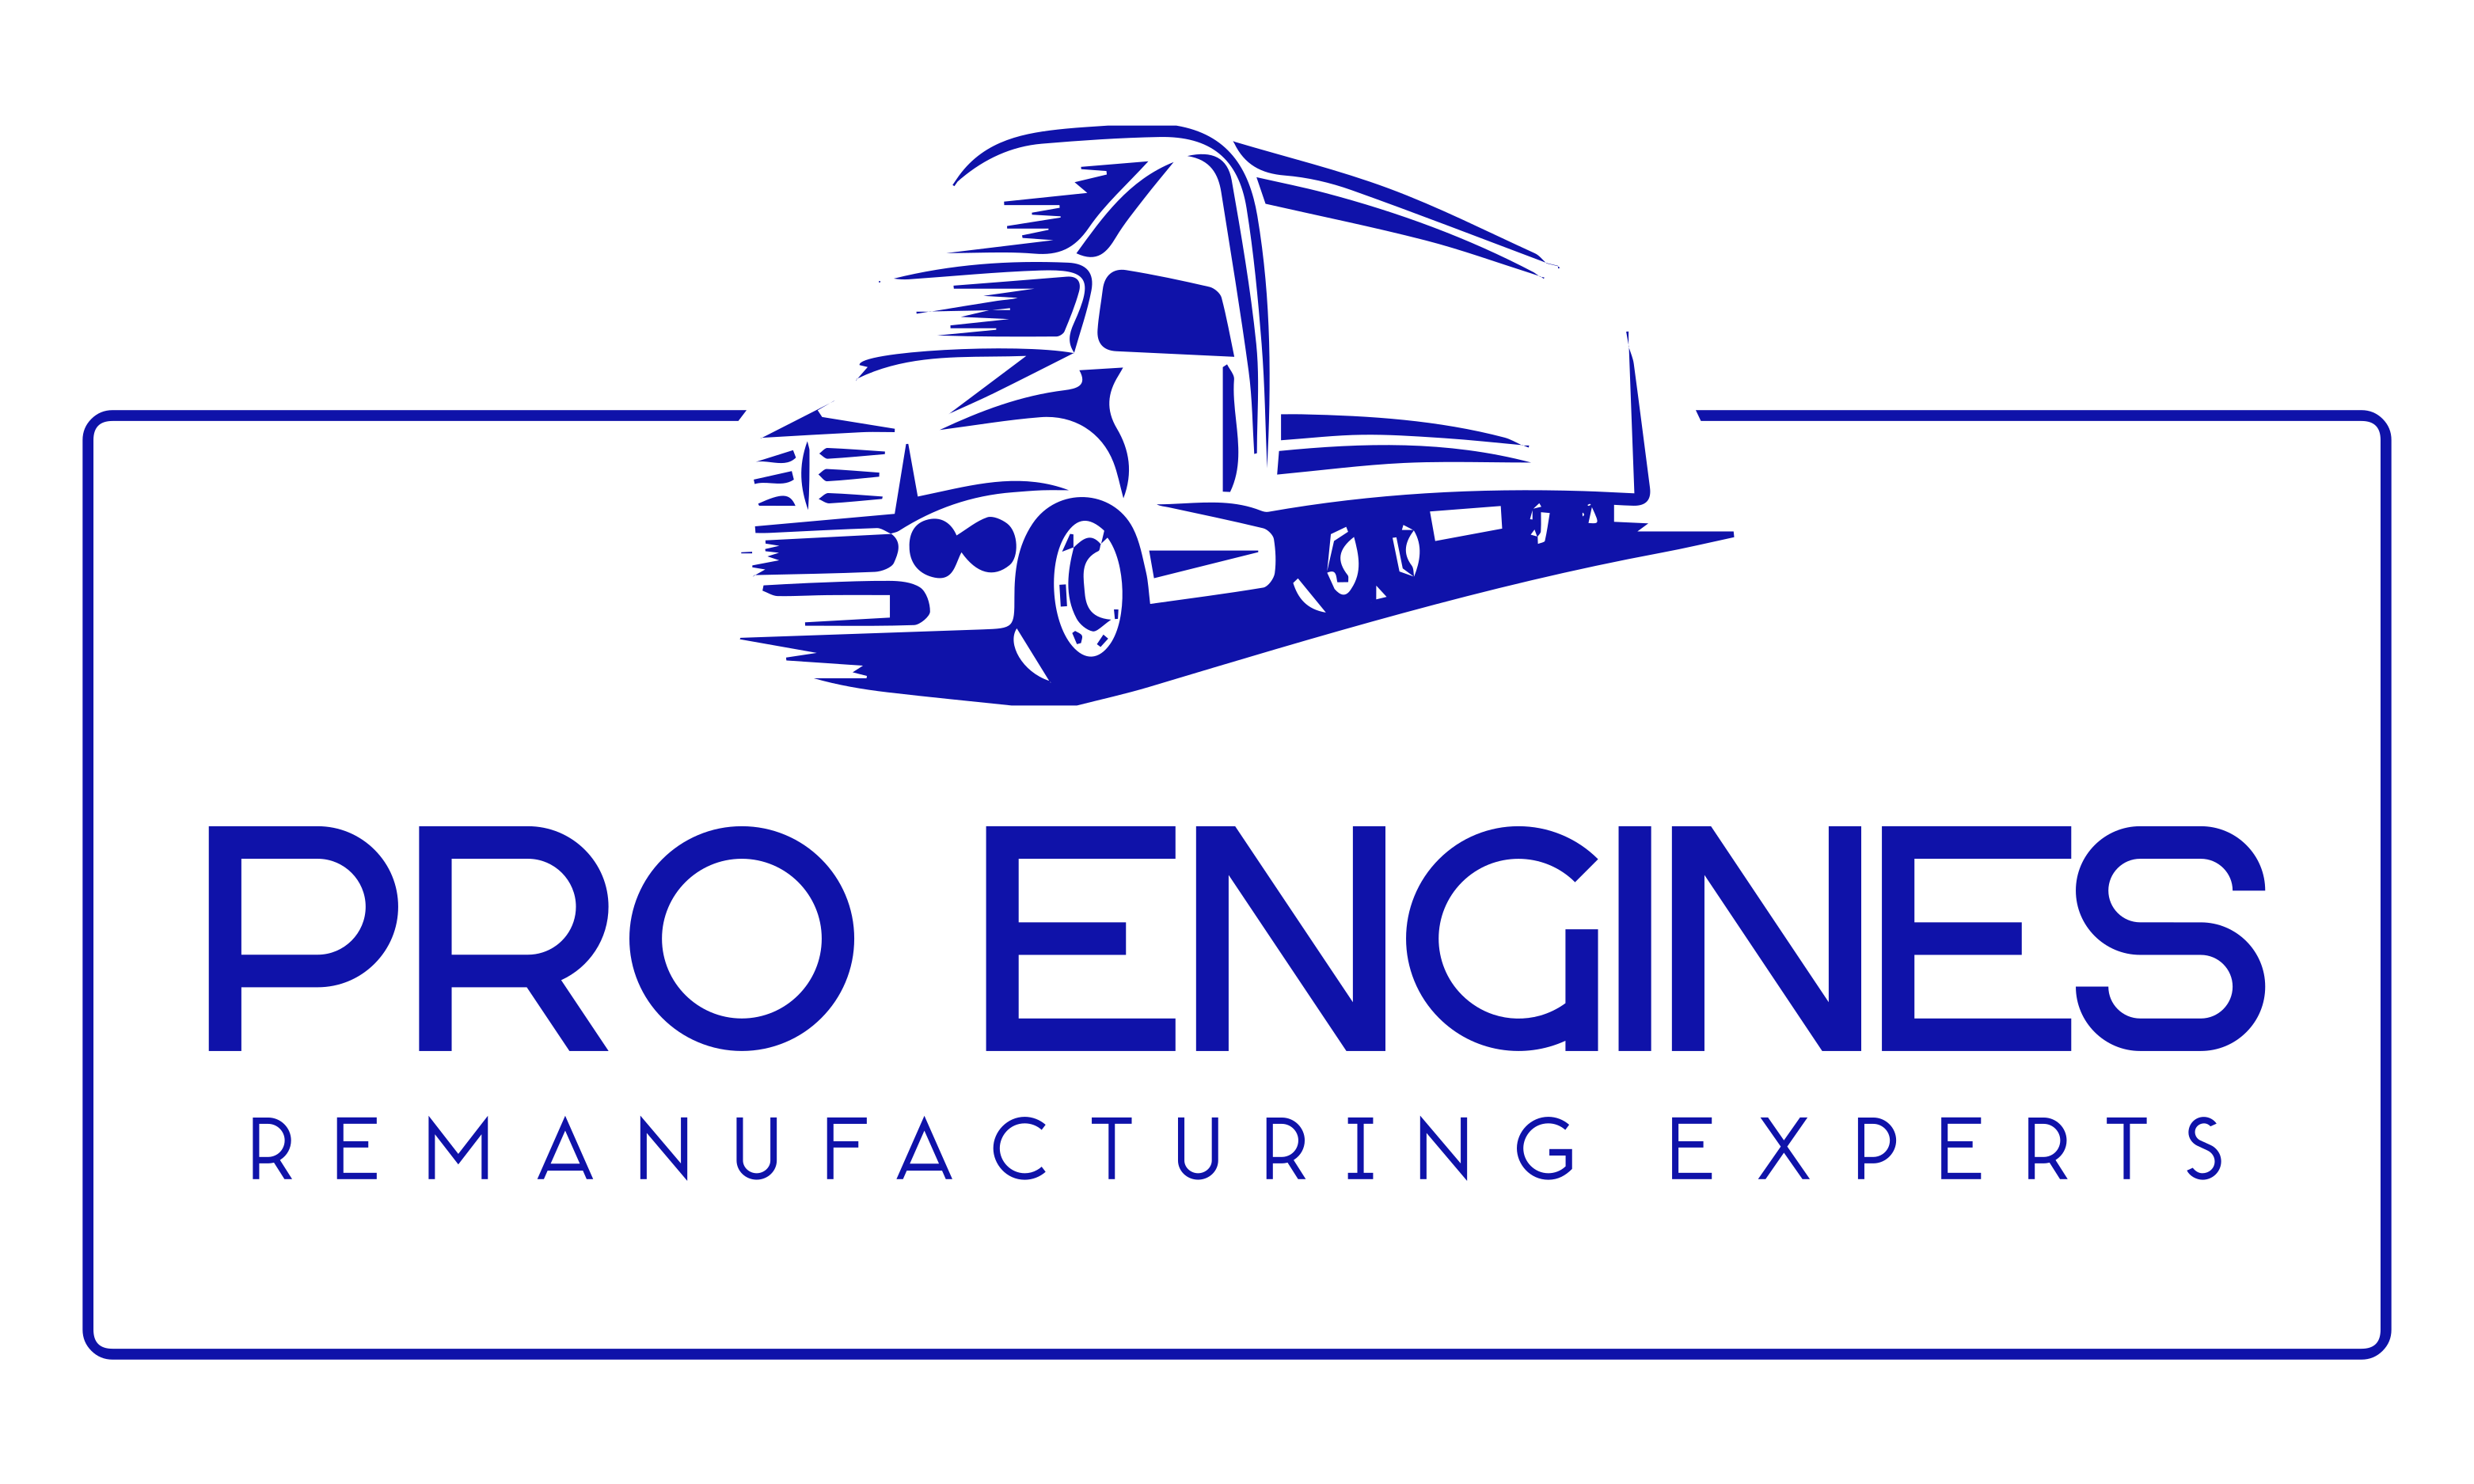 PRO engines Remanufacturing Experts